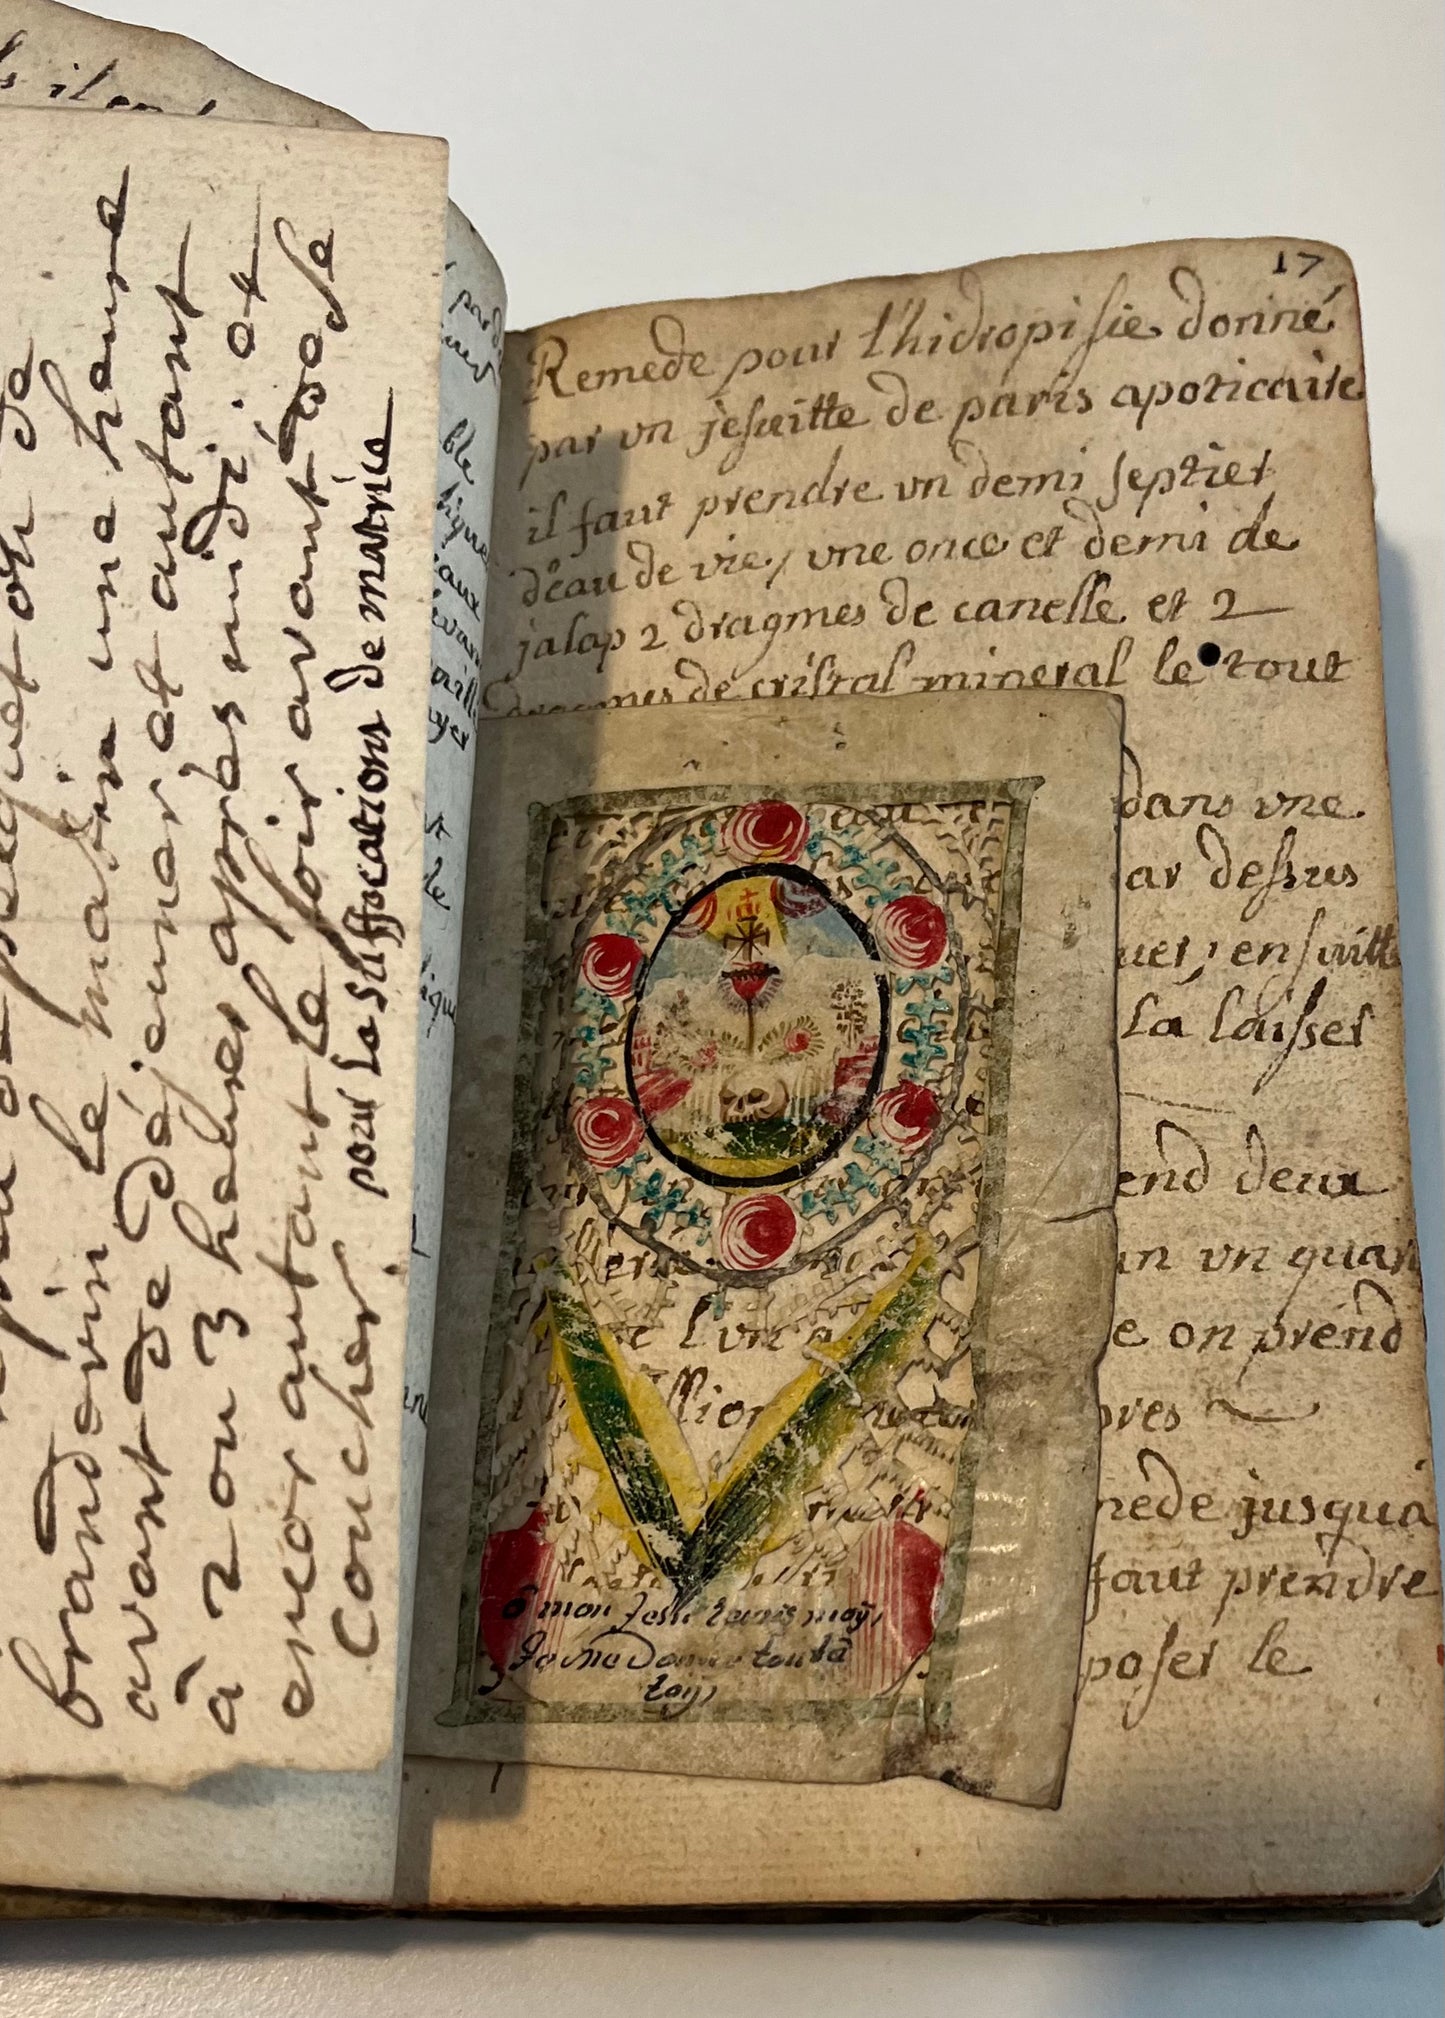 Early 18th Century Manuscript Medical book - Dragons blood and powdered Mummy -  15th Century Antiphonal leaf binding - 18th Century Prayers inserted